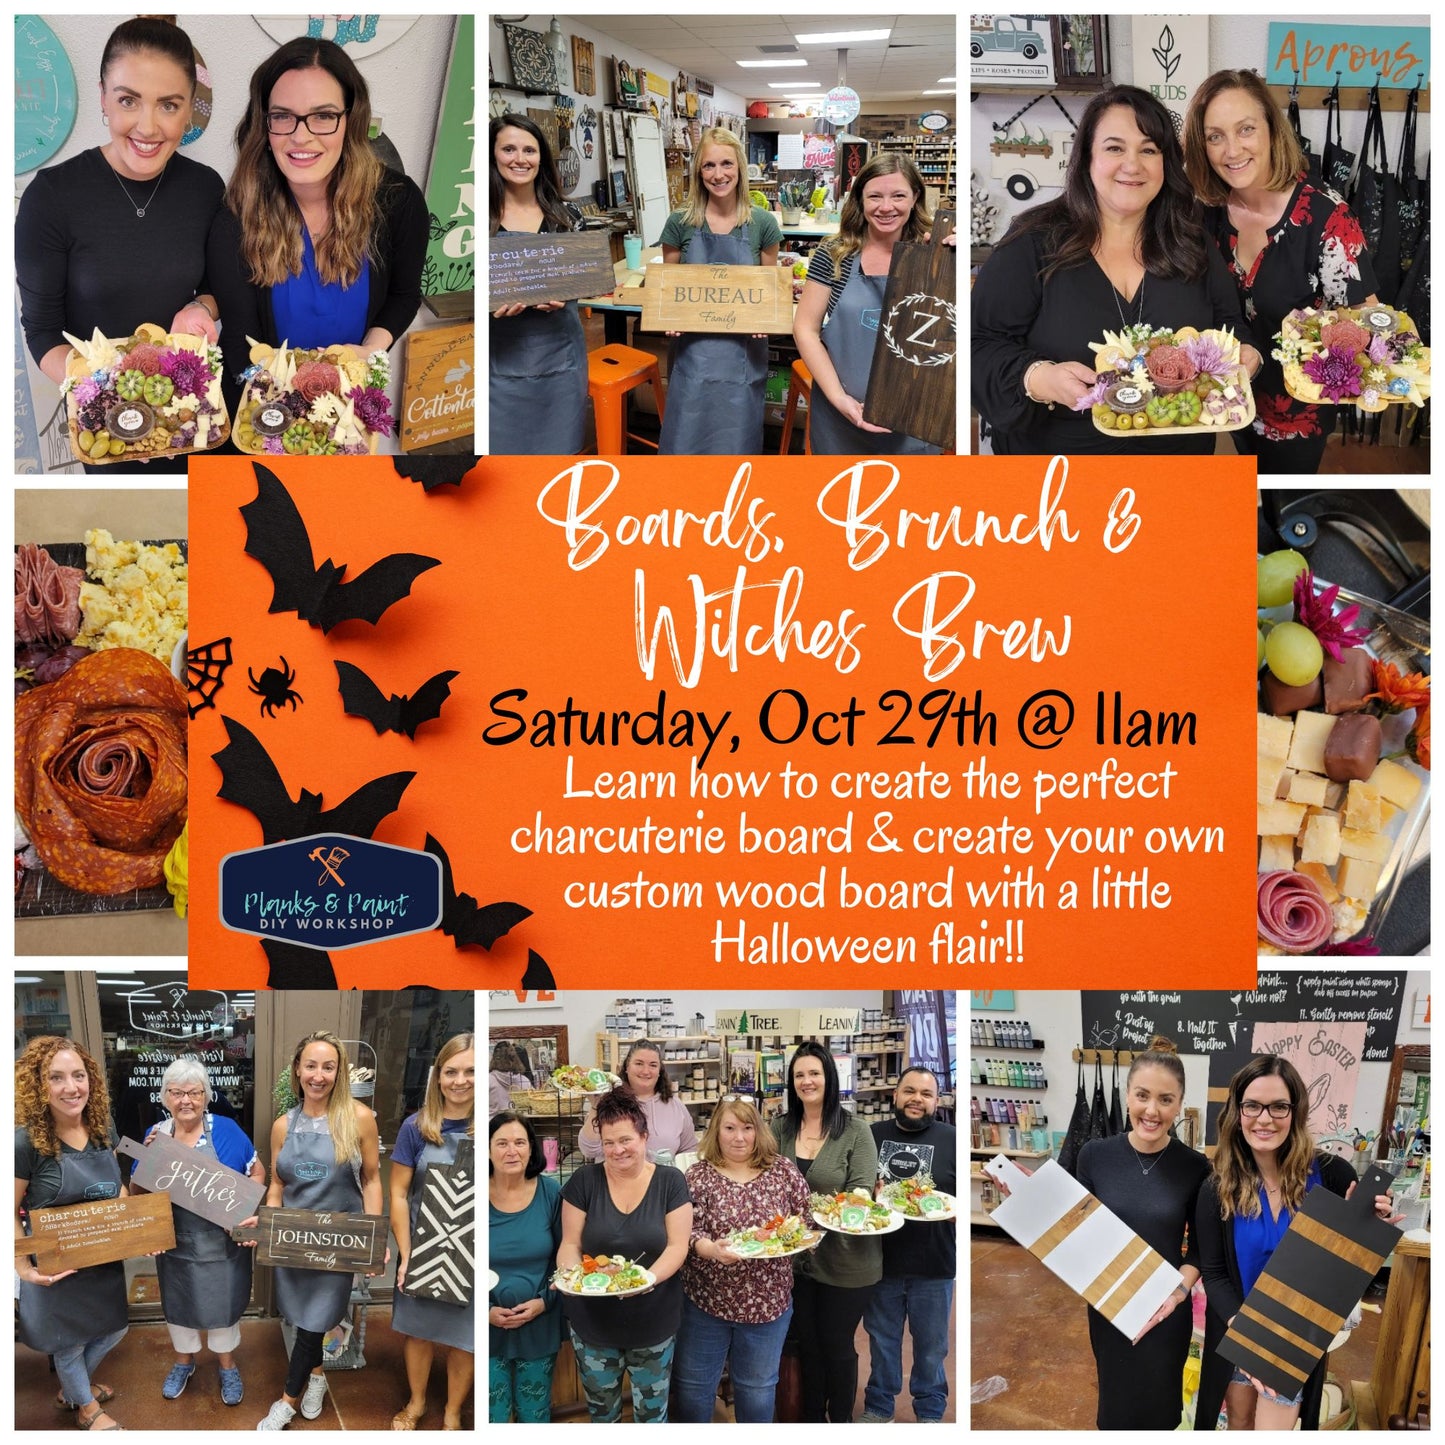 Boards, Brunch & Witches Brew - 10/29 @ 11am